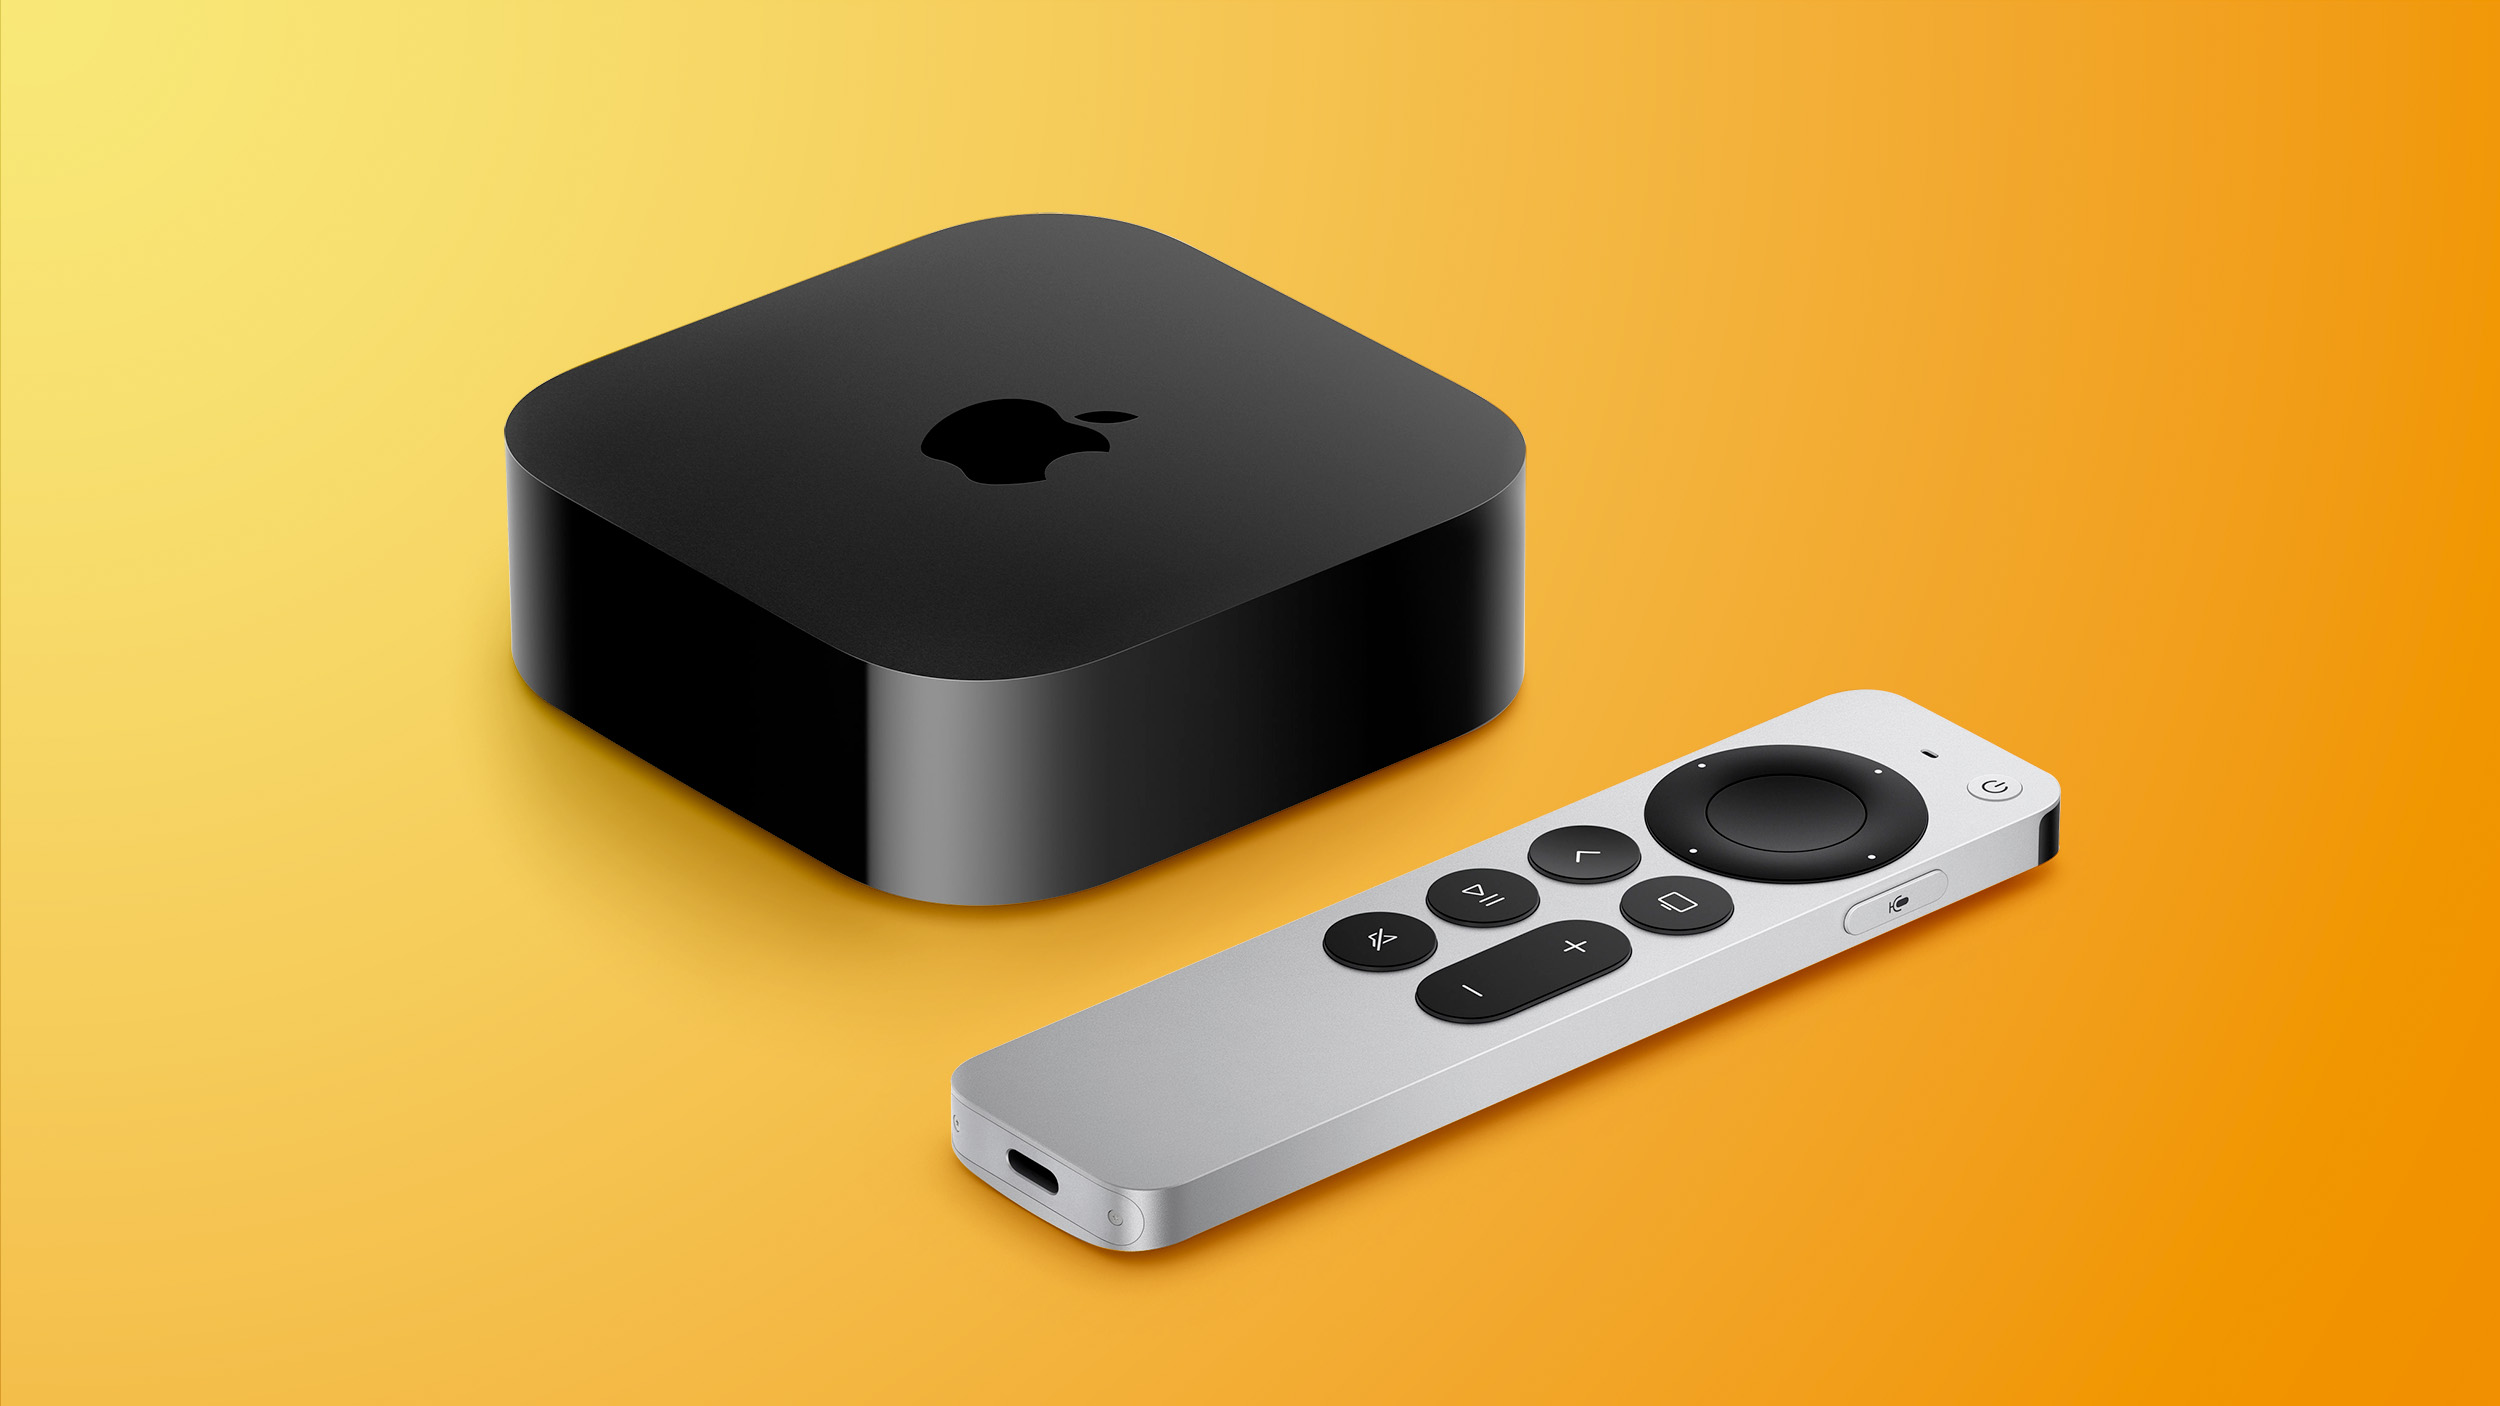 Retfærdighed peregrination dinosaurus Apple TV: Just Updated with A15 Chip and Cheaper Price